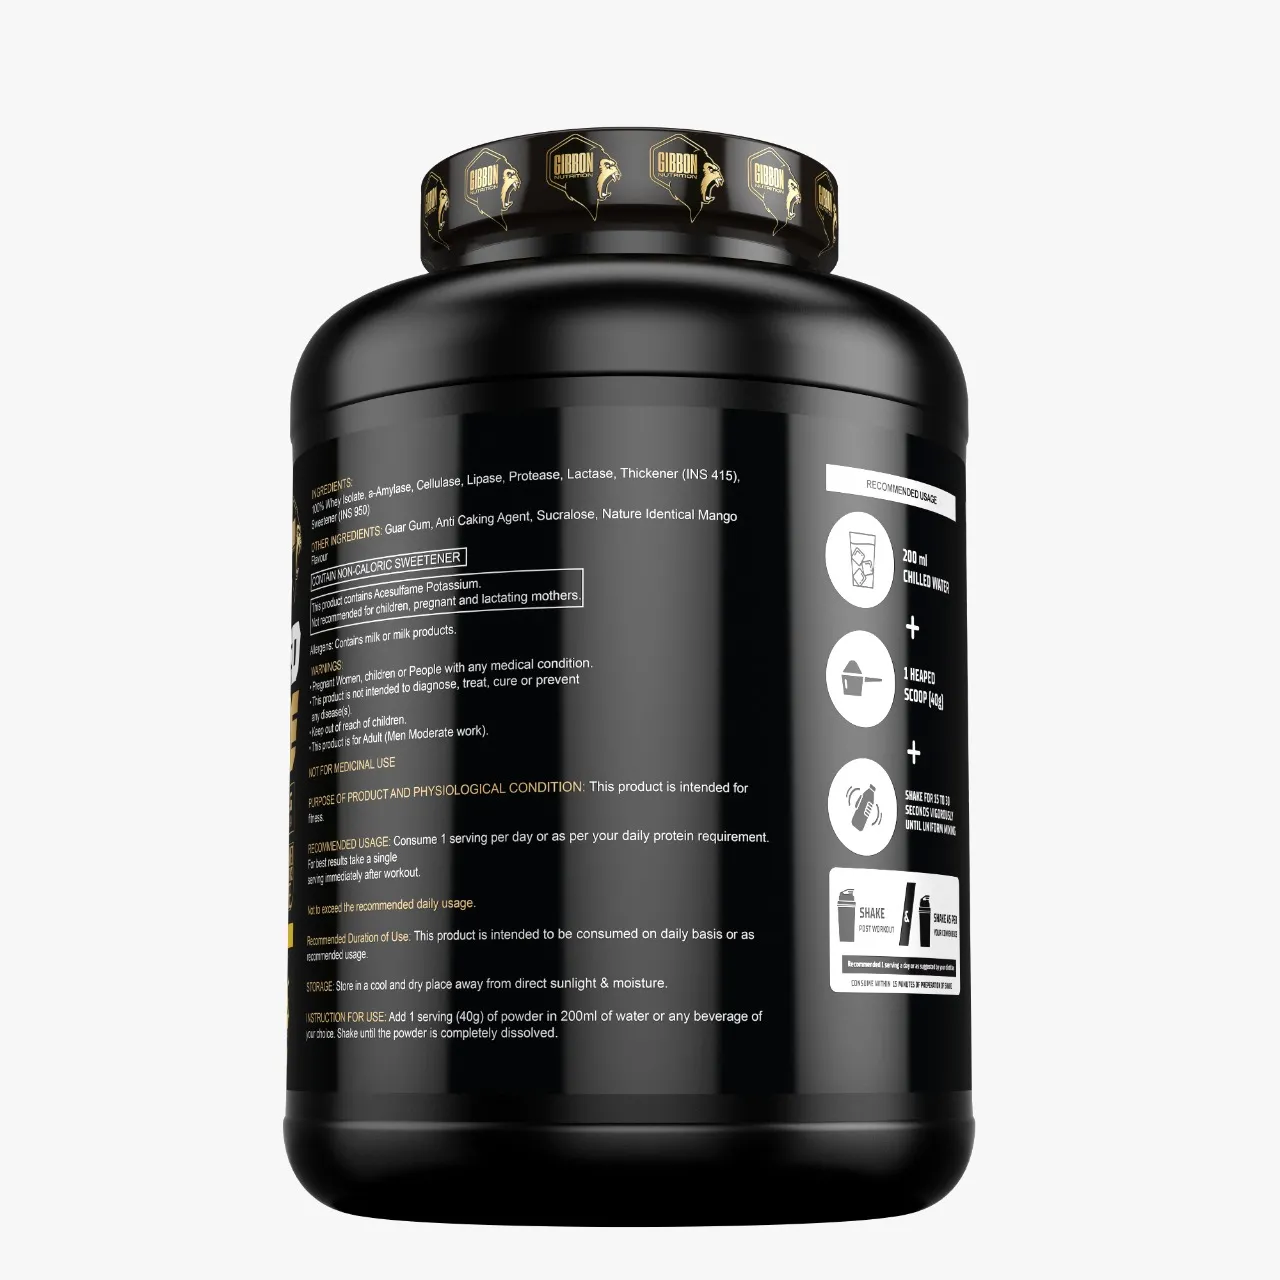 Gibbon Ripped Isolate Protein Powder | Ultimate Fat-Burning Fusion